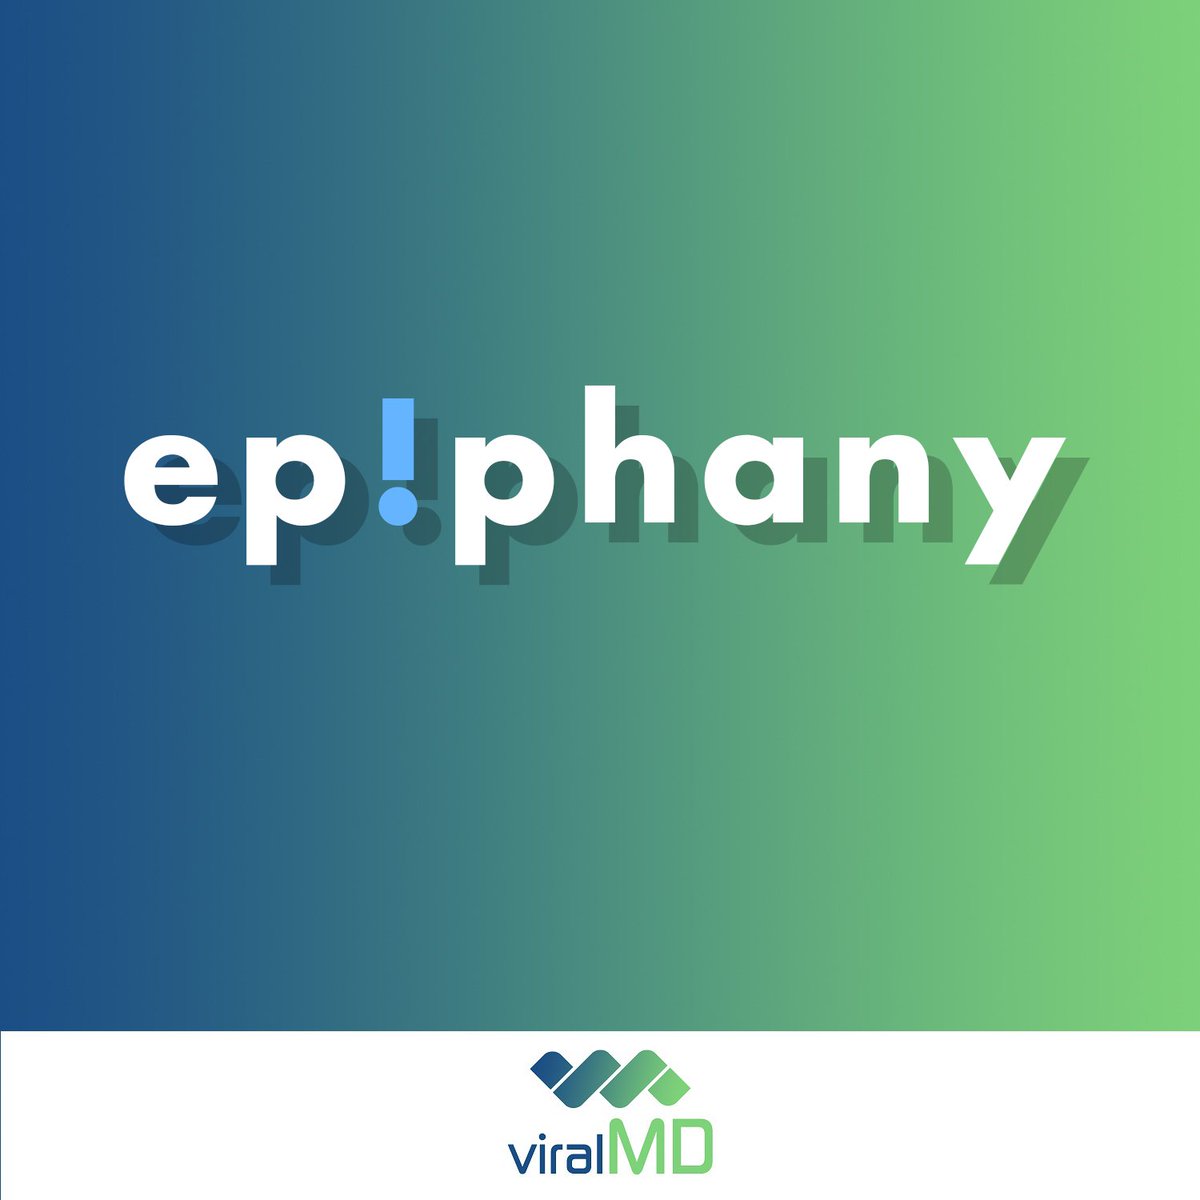 Epiphany Day We see clearly that your social media needs a boost. Let's shine a light on your brand for maximum engagement.
#healthcaresocialmedia #brandbrilliance #viralmd